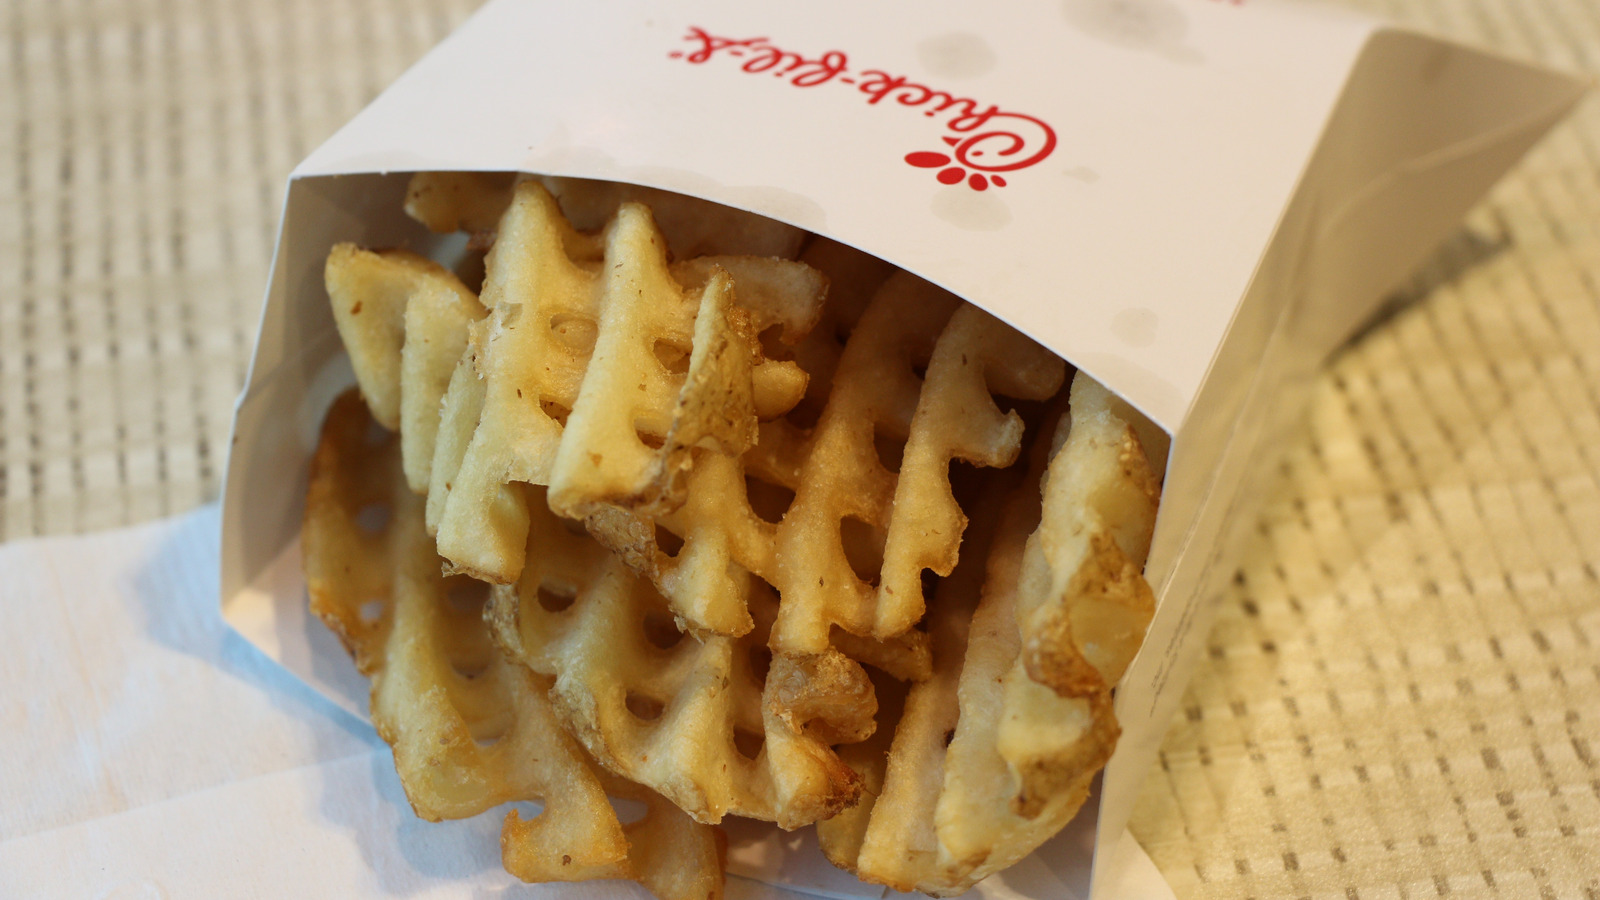 Fans Are Annoyed By This Chick-Fil-A Fry Complaint - Mashed